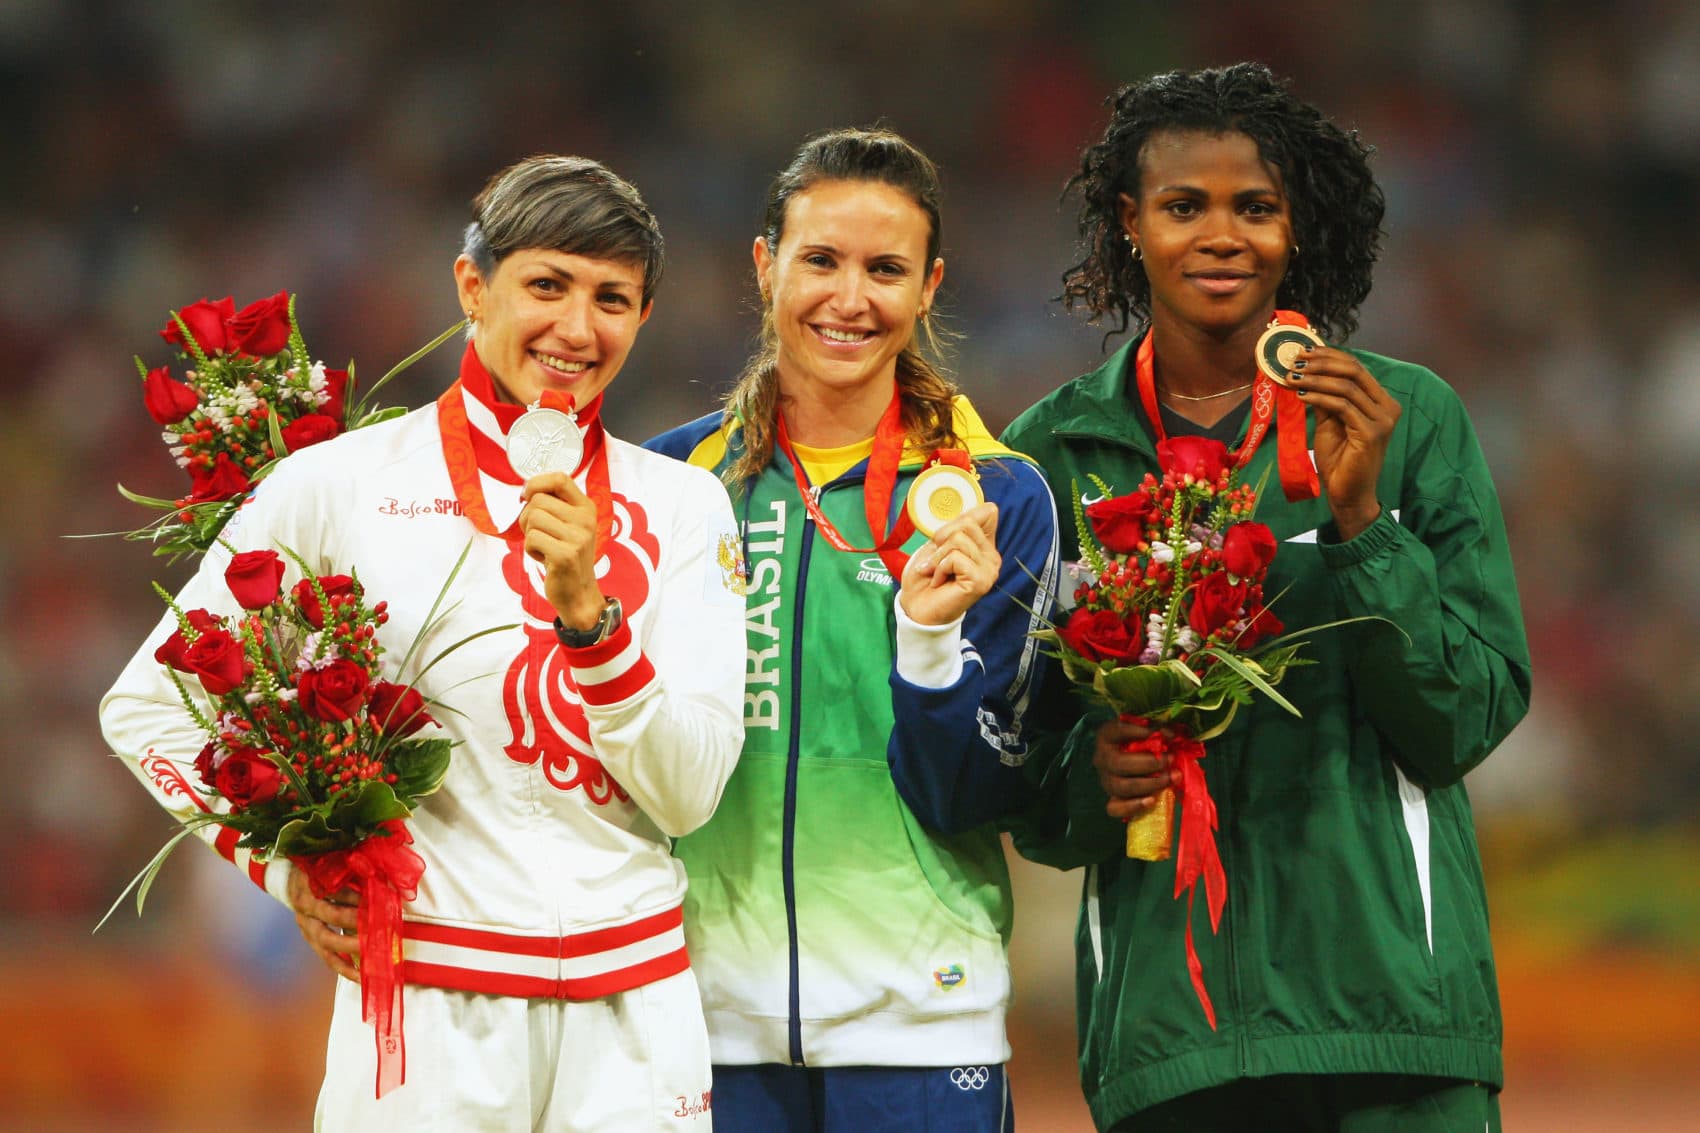 Blessing Okagbare (right) receives her medal at the 2008 Olympic Games. Tatyana Lebedeva (left) was later disqualified for doping and stripped of her silver medal. (Stu Forster/Getty Images)